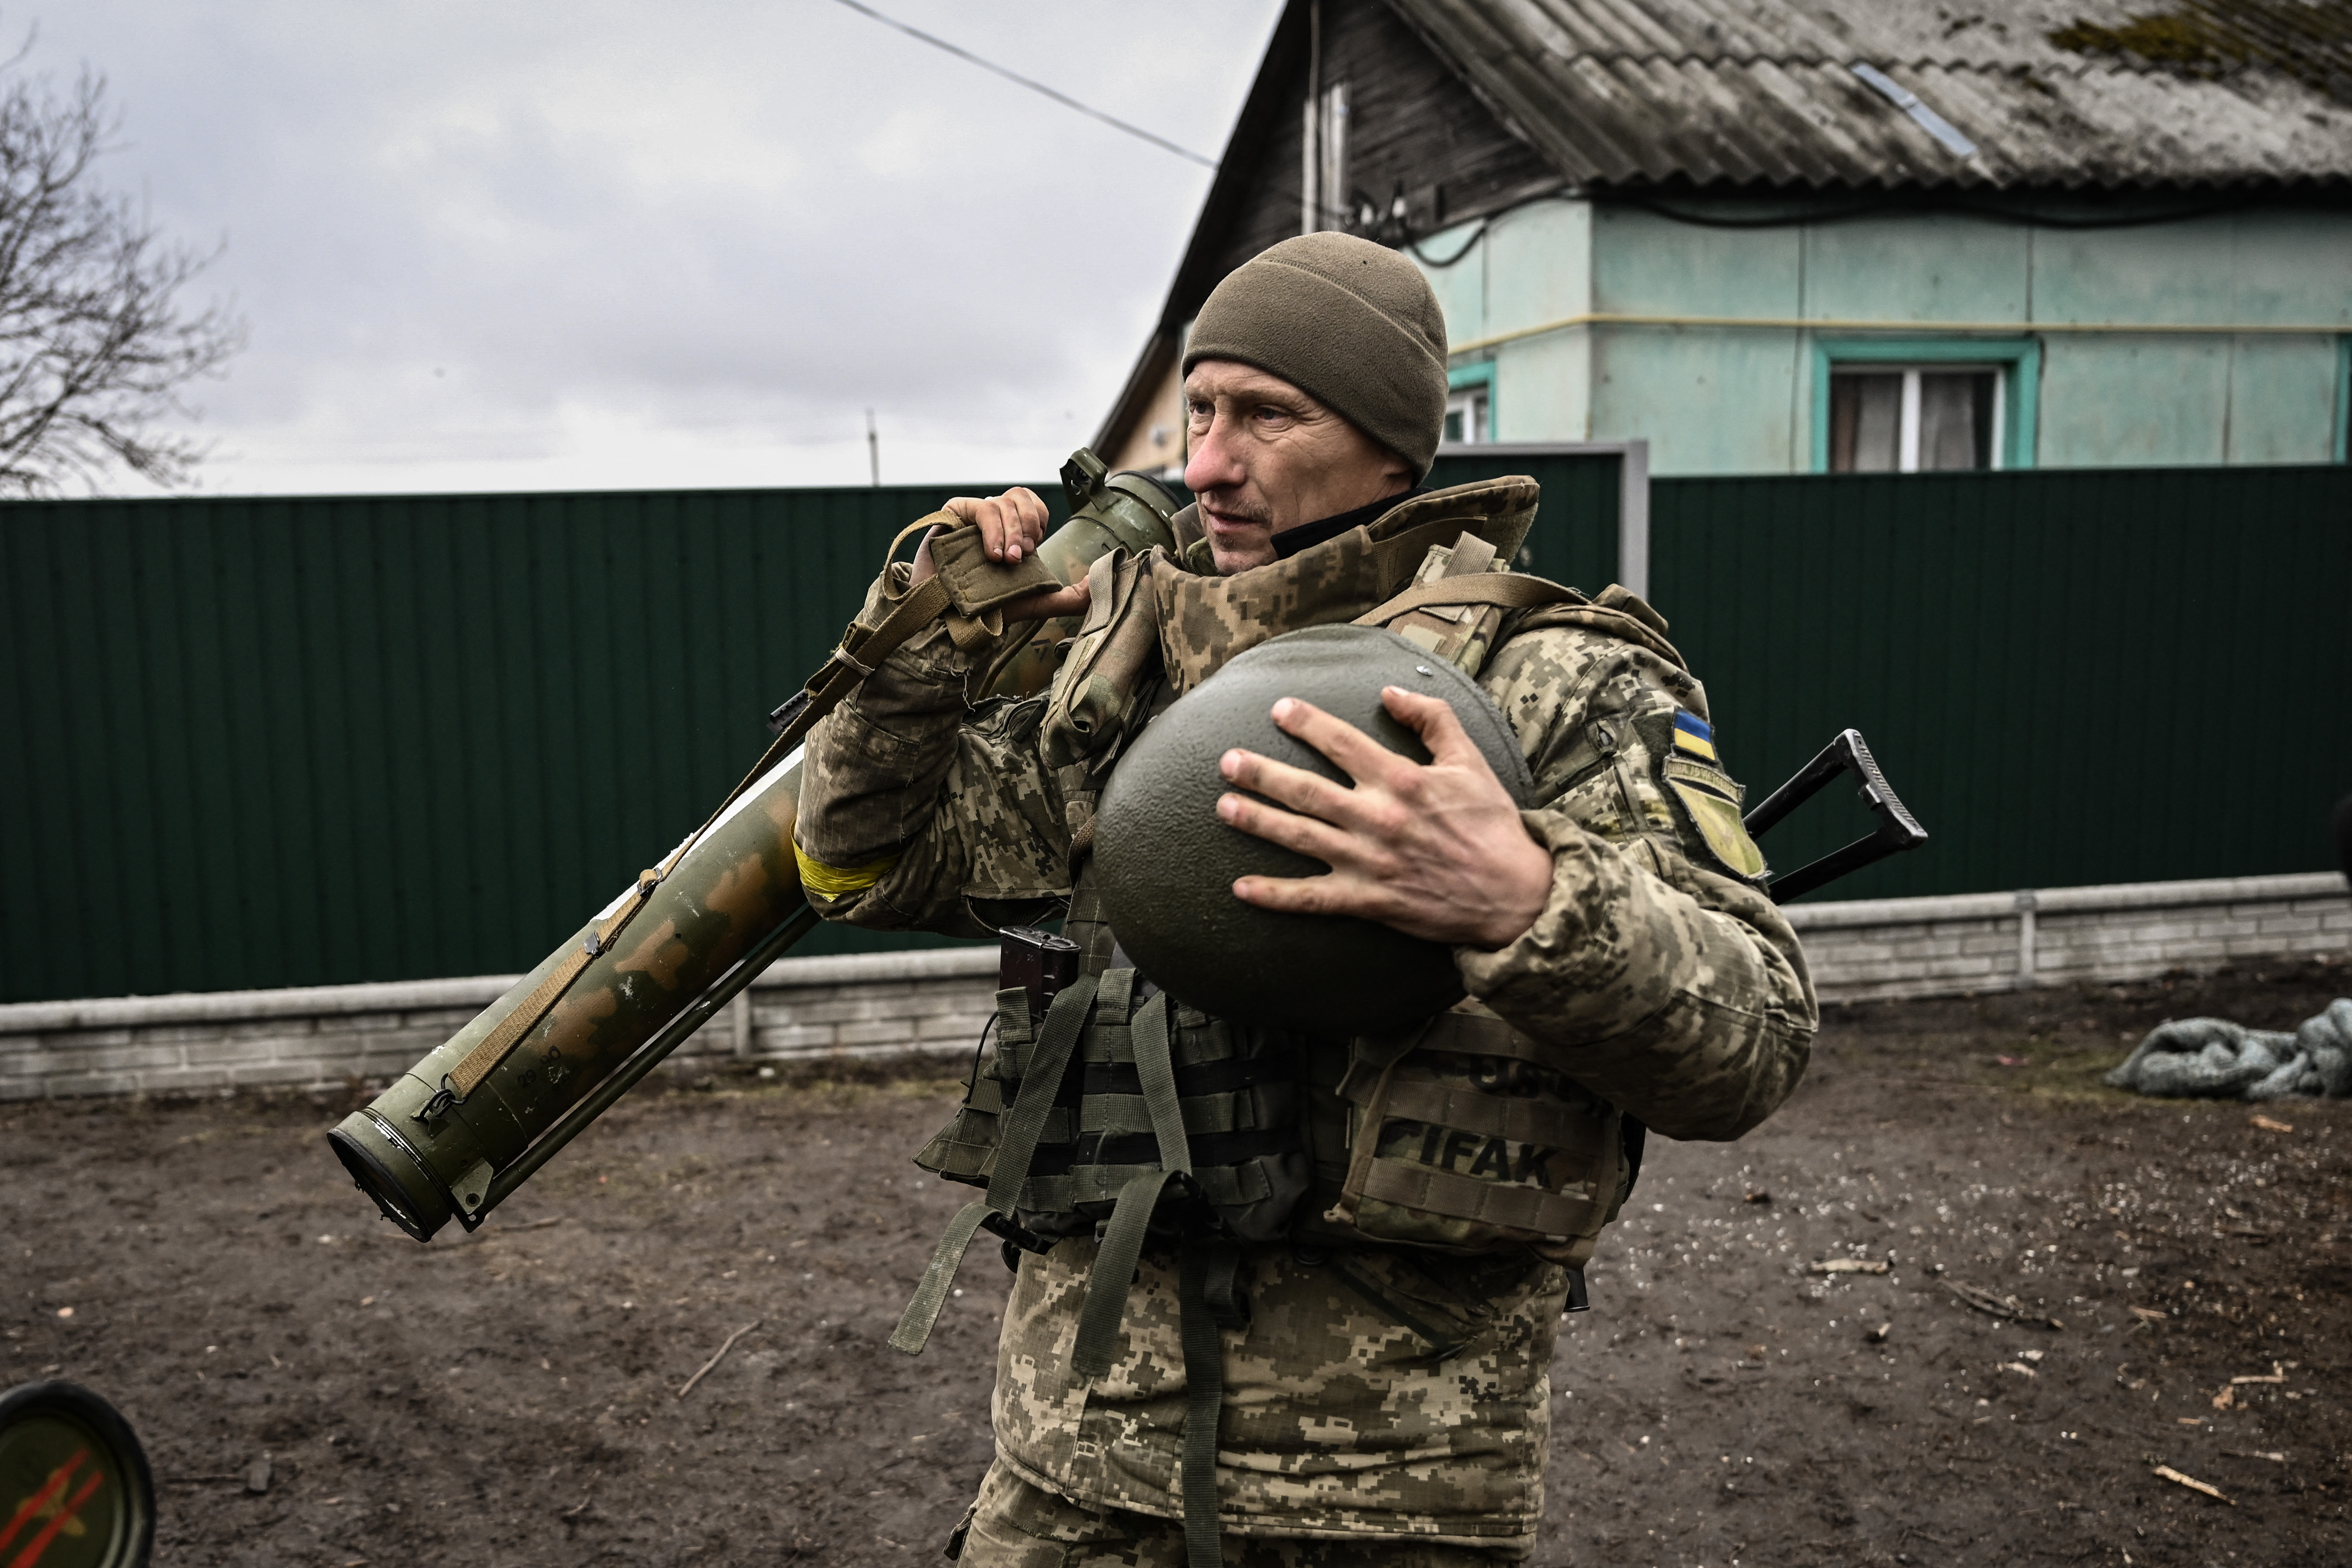 A Ukrainian soldier holds an anti-tank weapon at a front line northeast of Kyiv on March 3, 2022. Photo: Aris Messinis / AFP